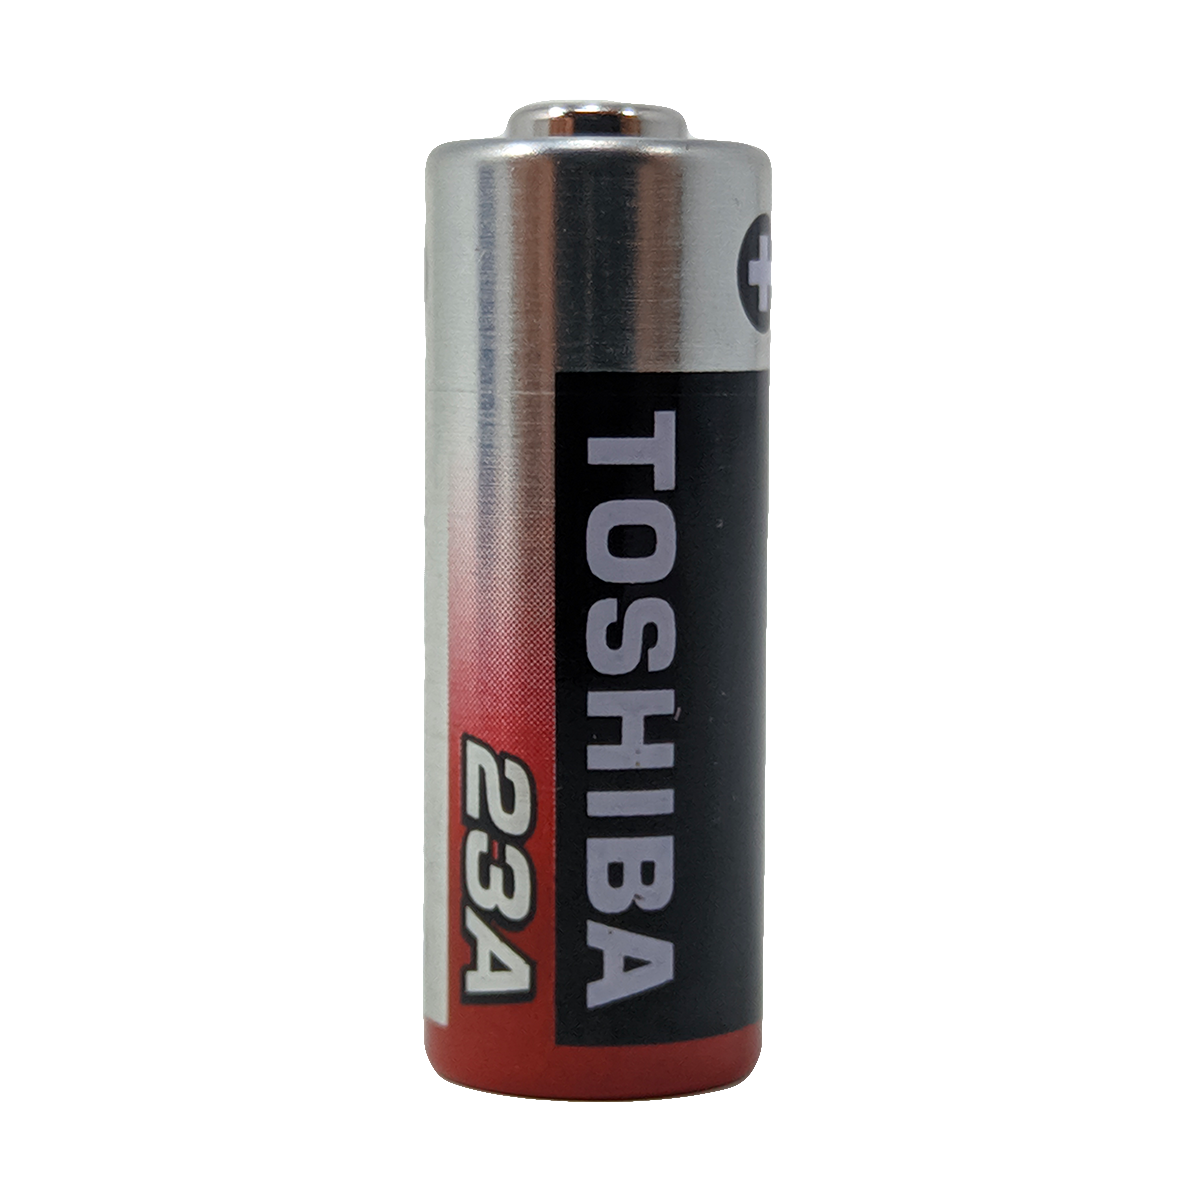 Alkaline Batteries- Buy A23 replacements and equivalents